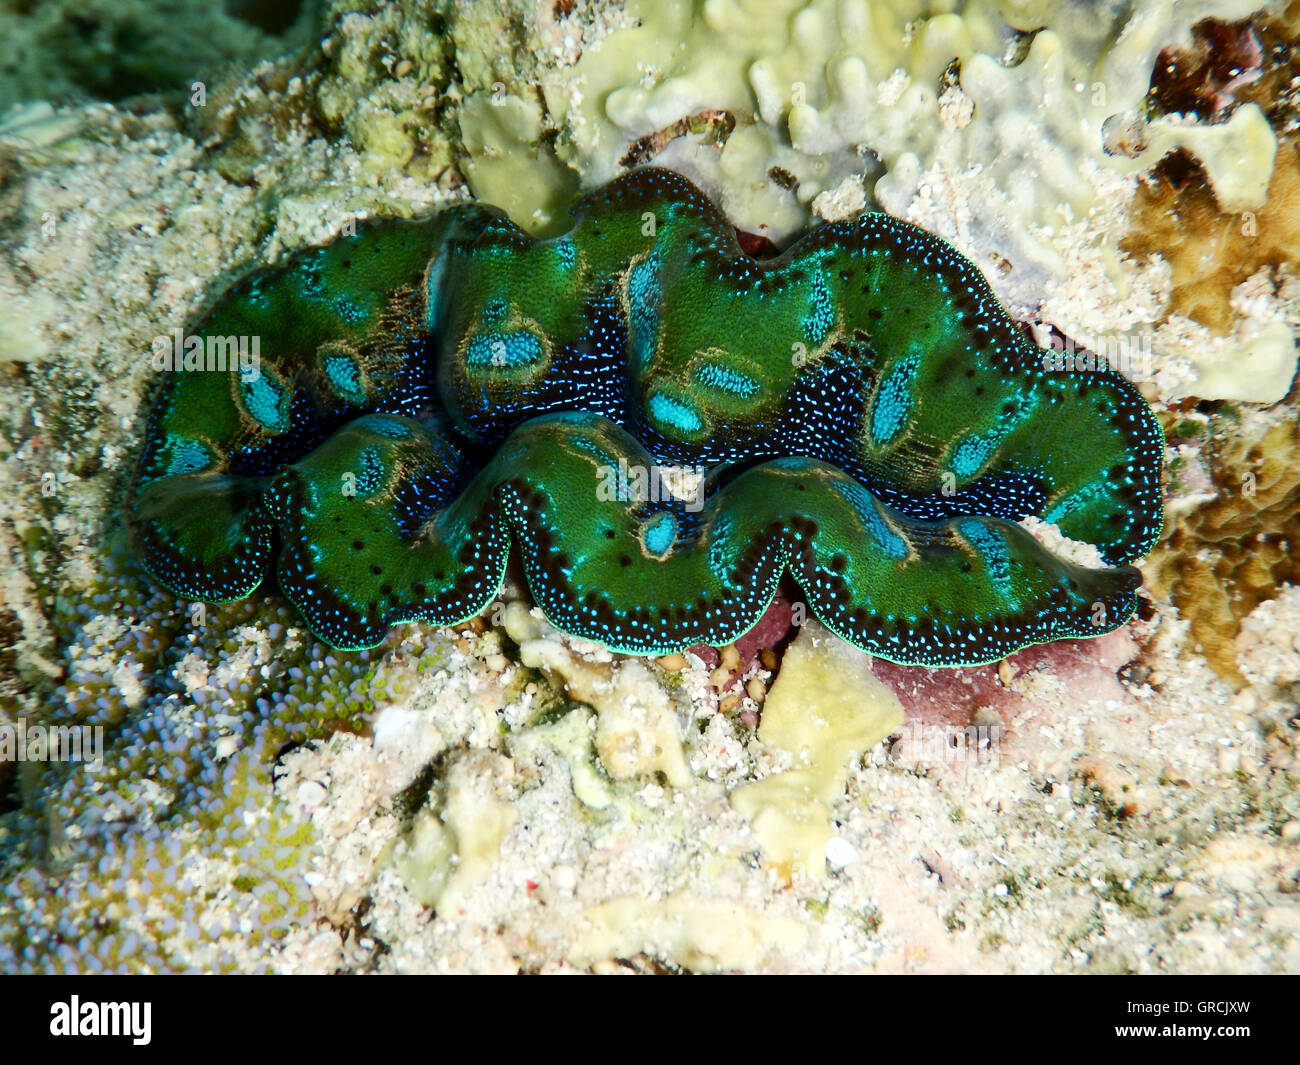 Colorful Bivalve Maxima Clam Imbedded In Stony Corals. Selayar, South Sulawesi, Indonesia Stock Photo